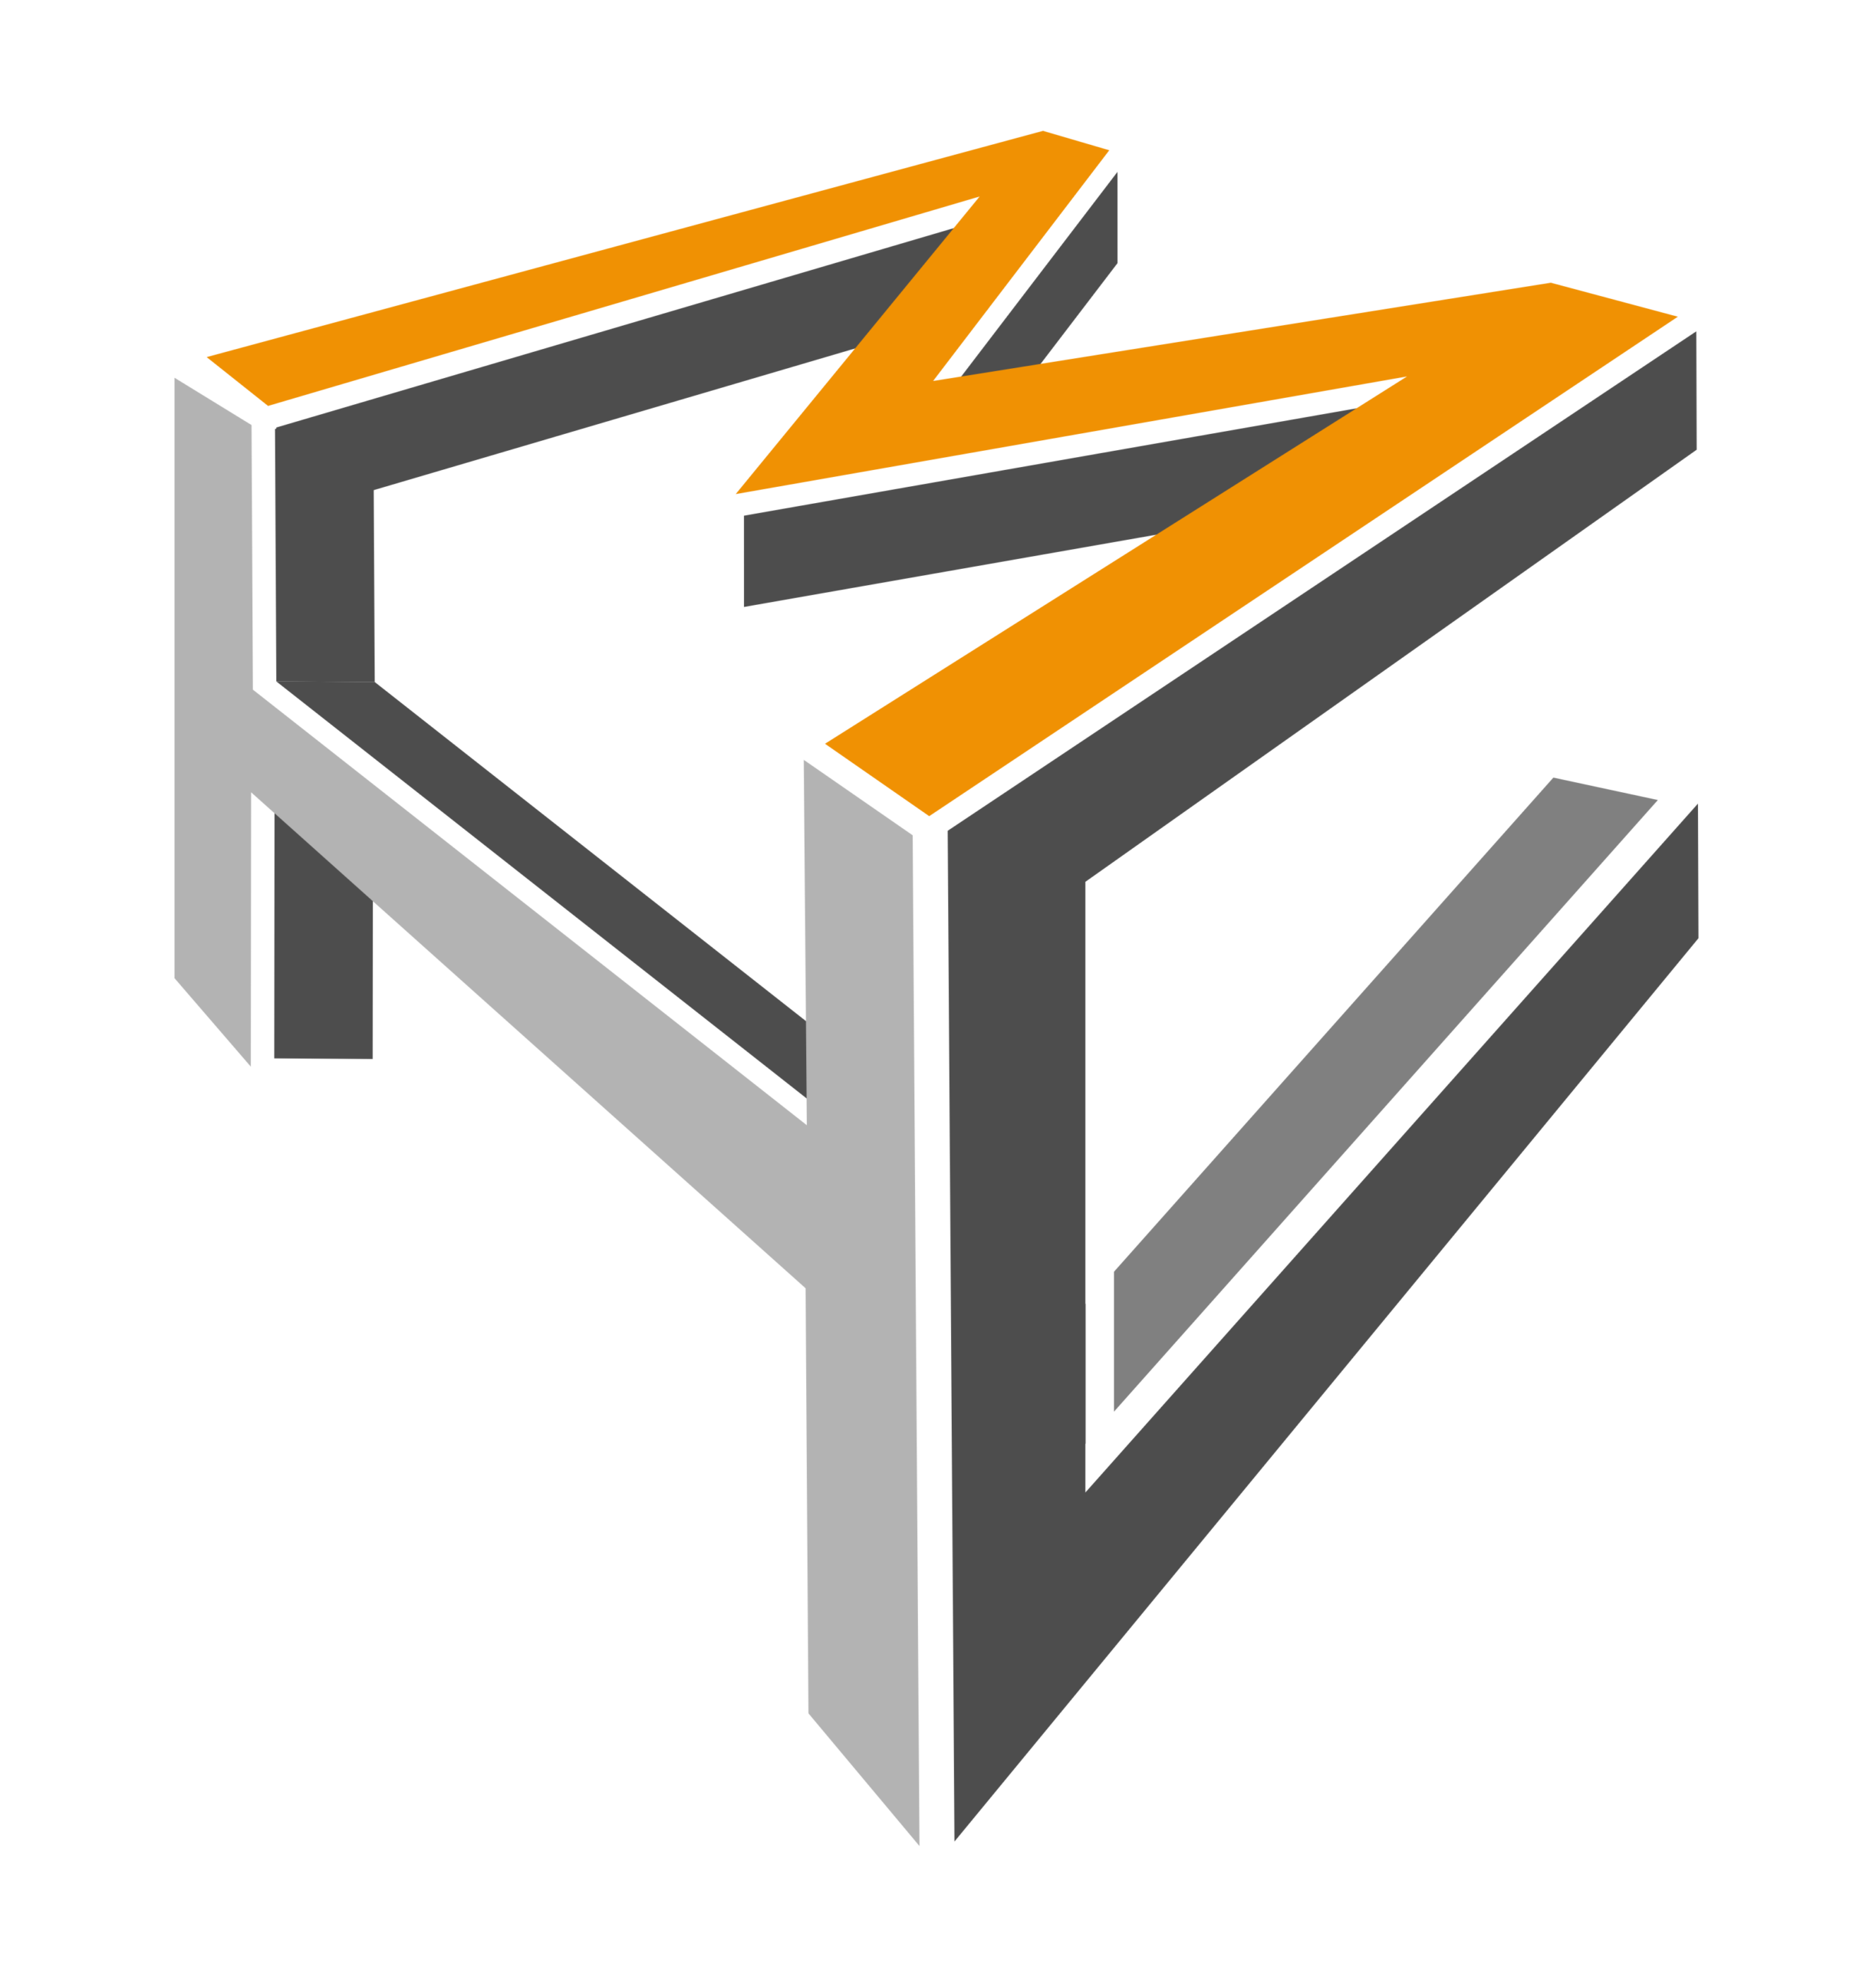 A 3 d image of an orange and grey logo.